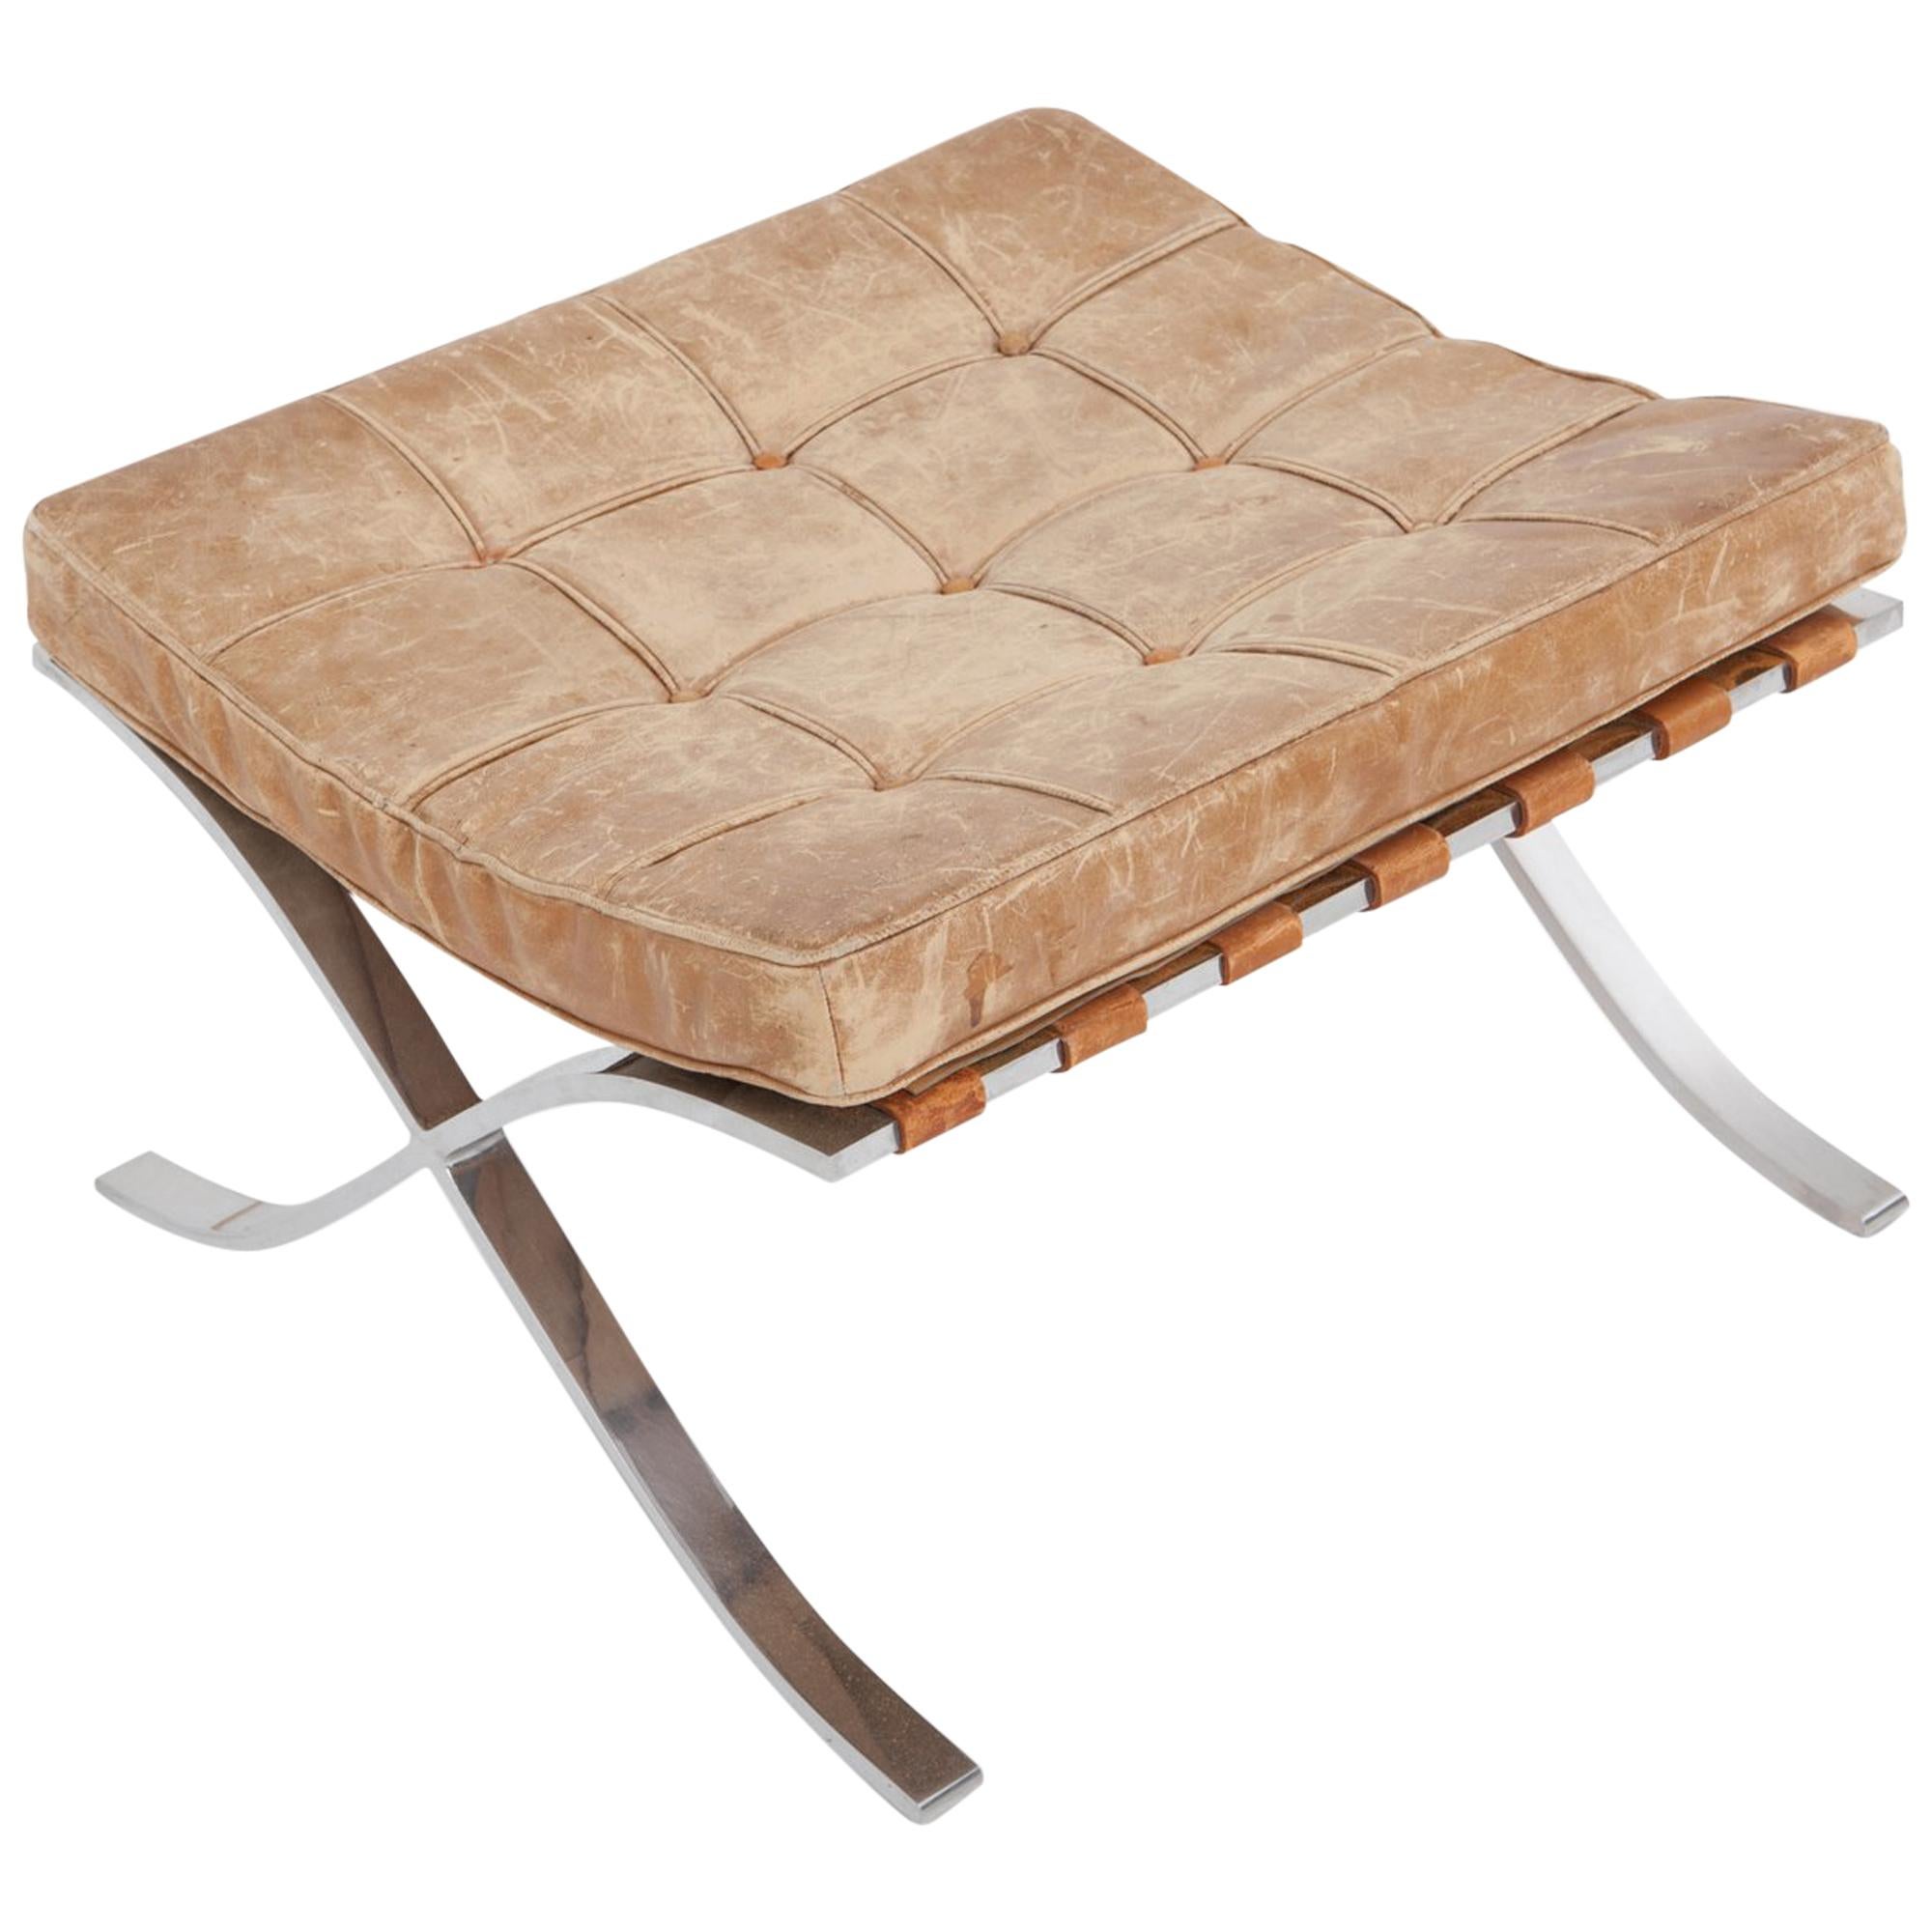 Barcelona Ottoman by Ludwig Mies van der Rohe in Original Cognac Leather, 1960s